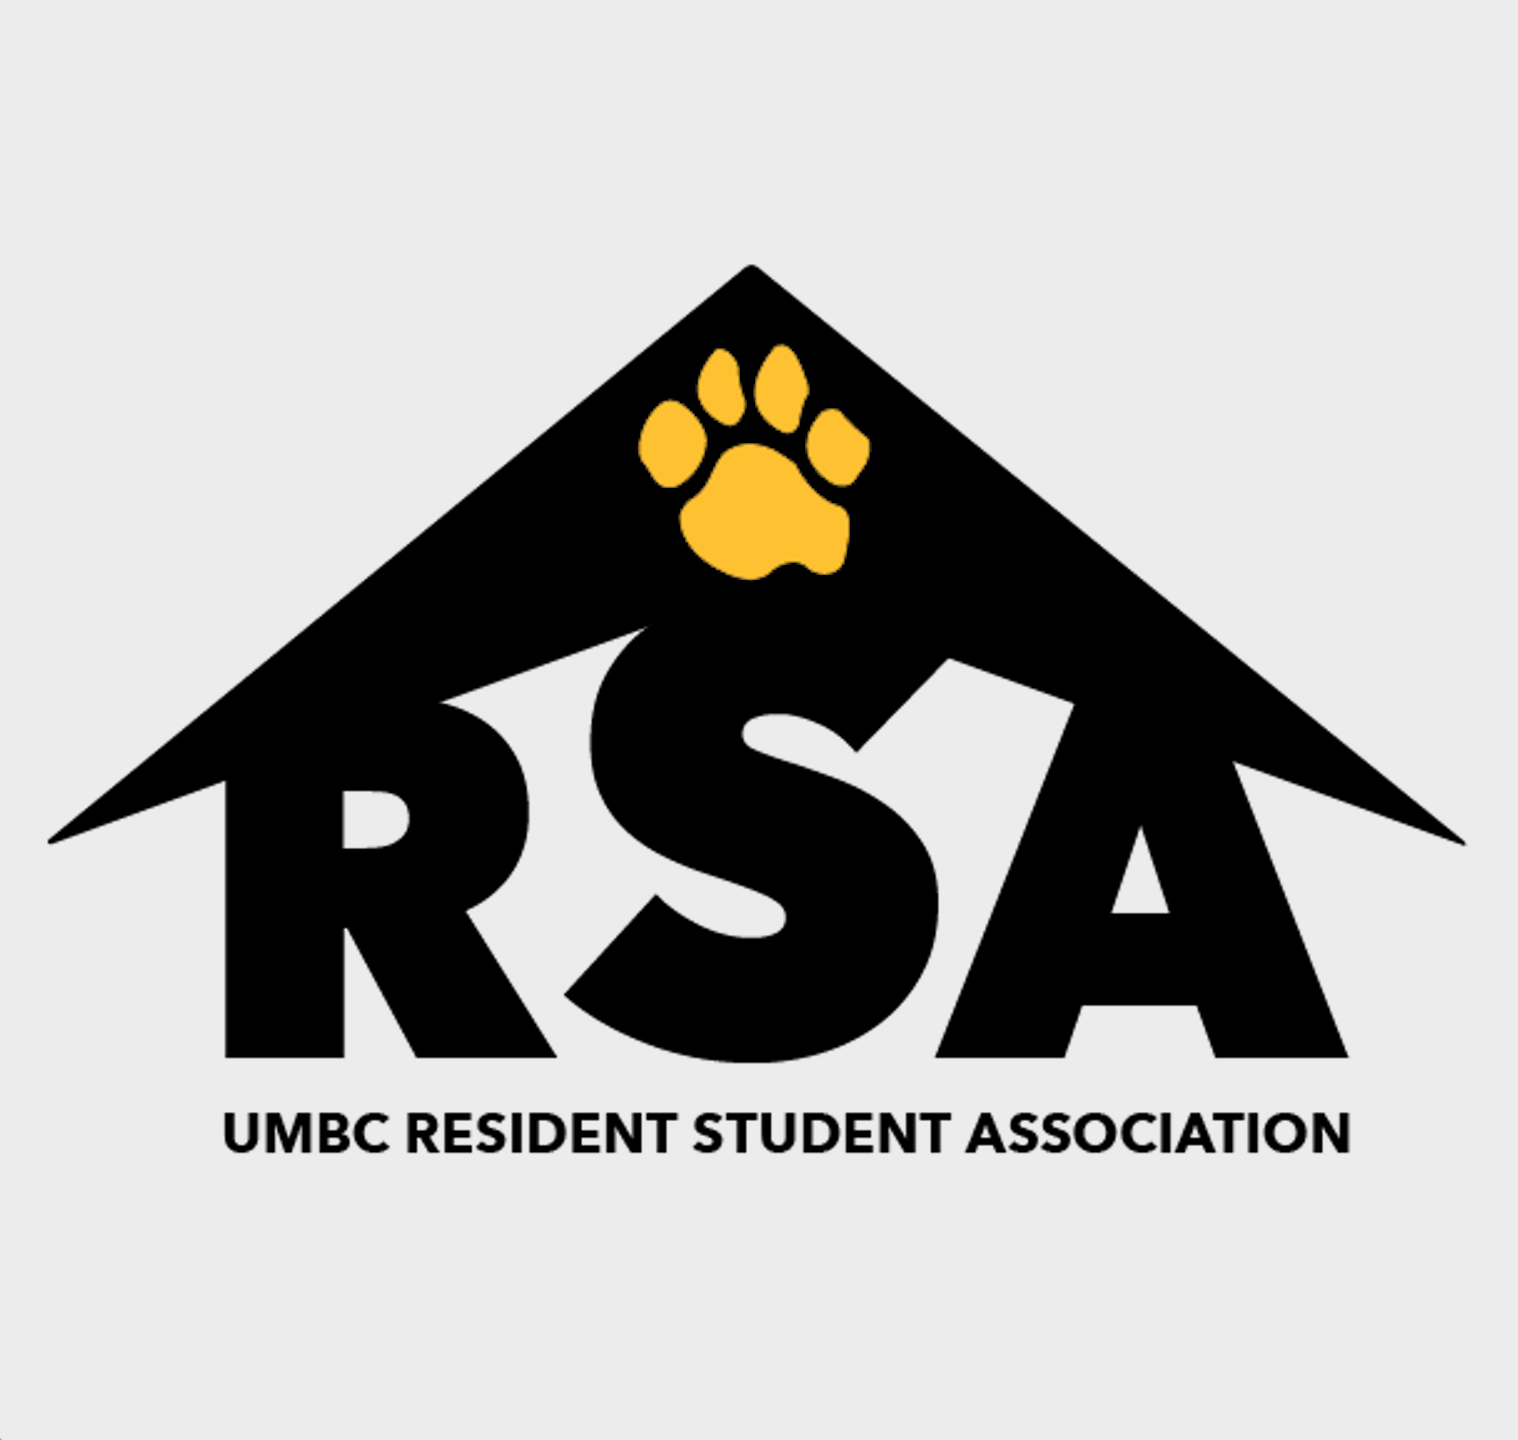 Apply to join the RSA Executive Board!